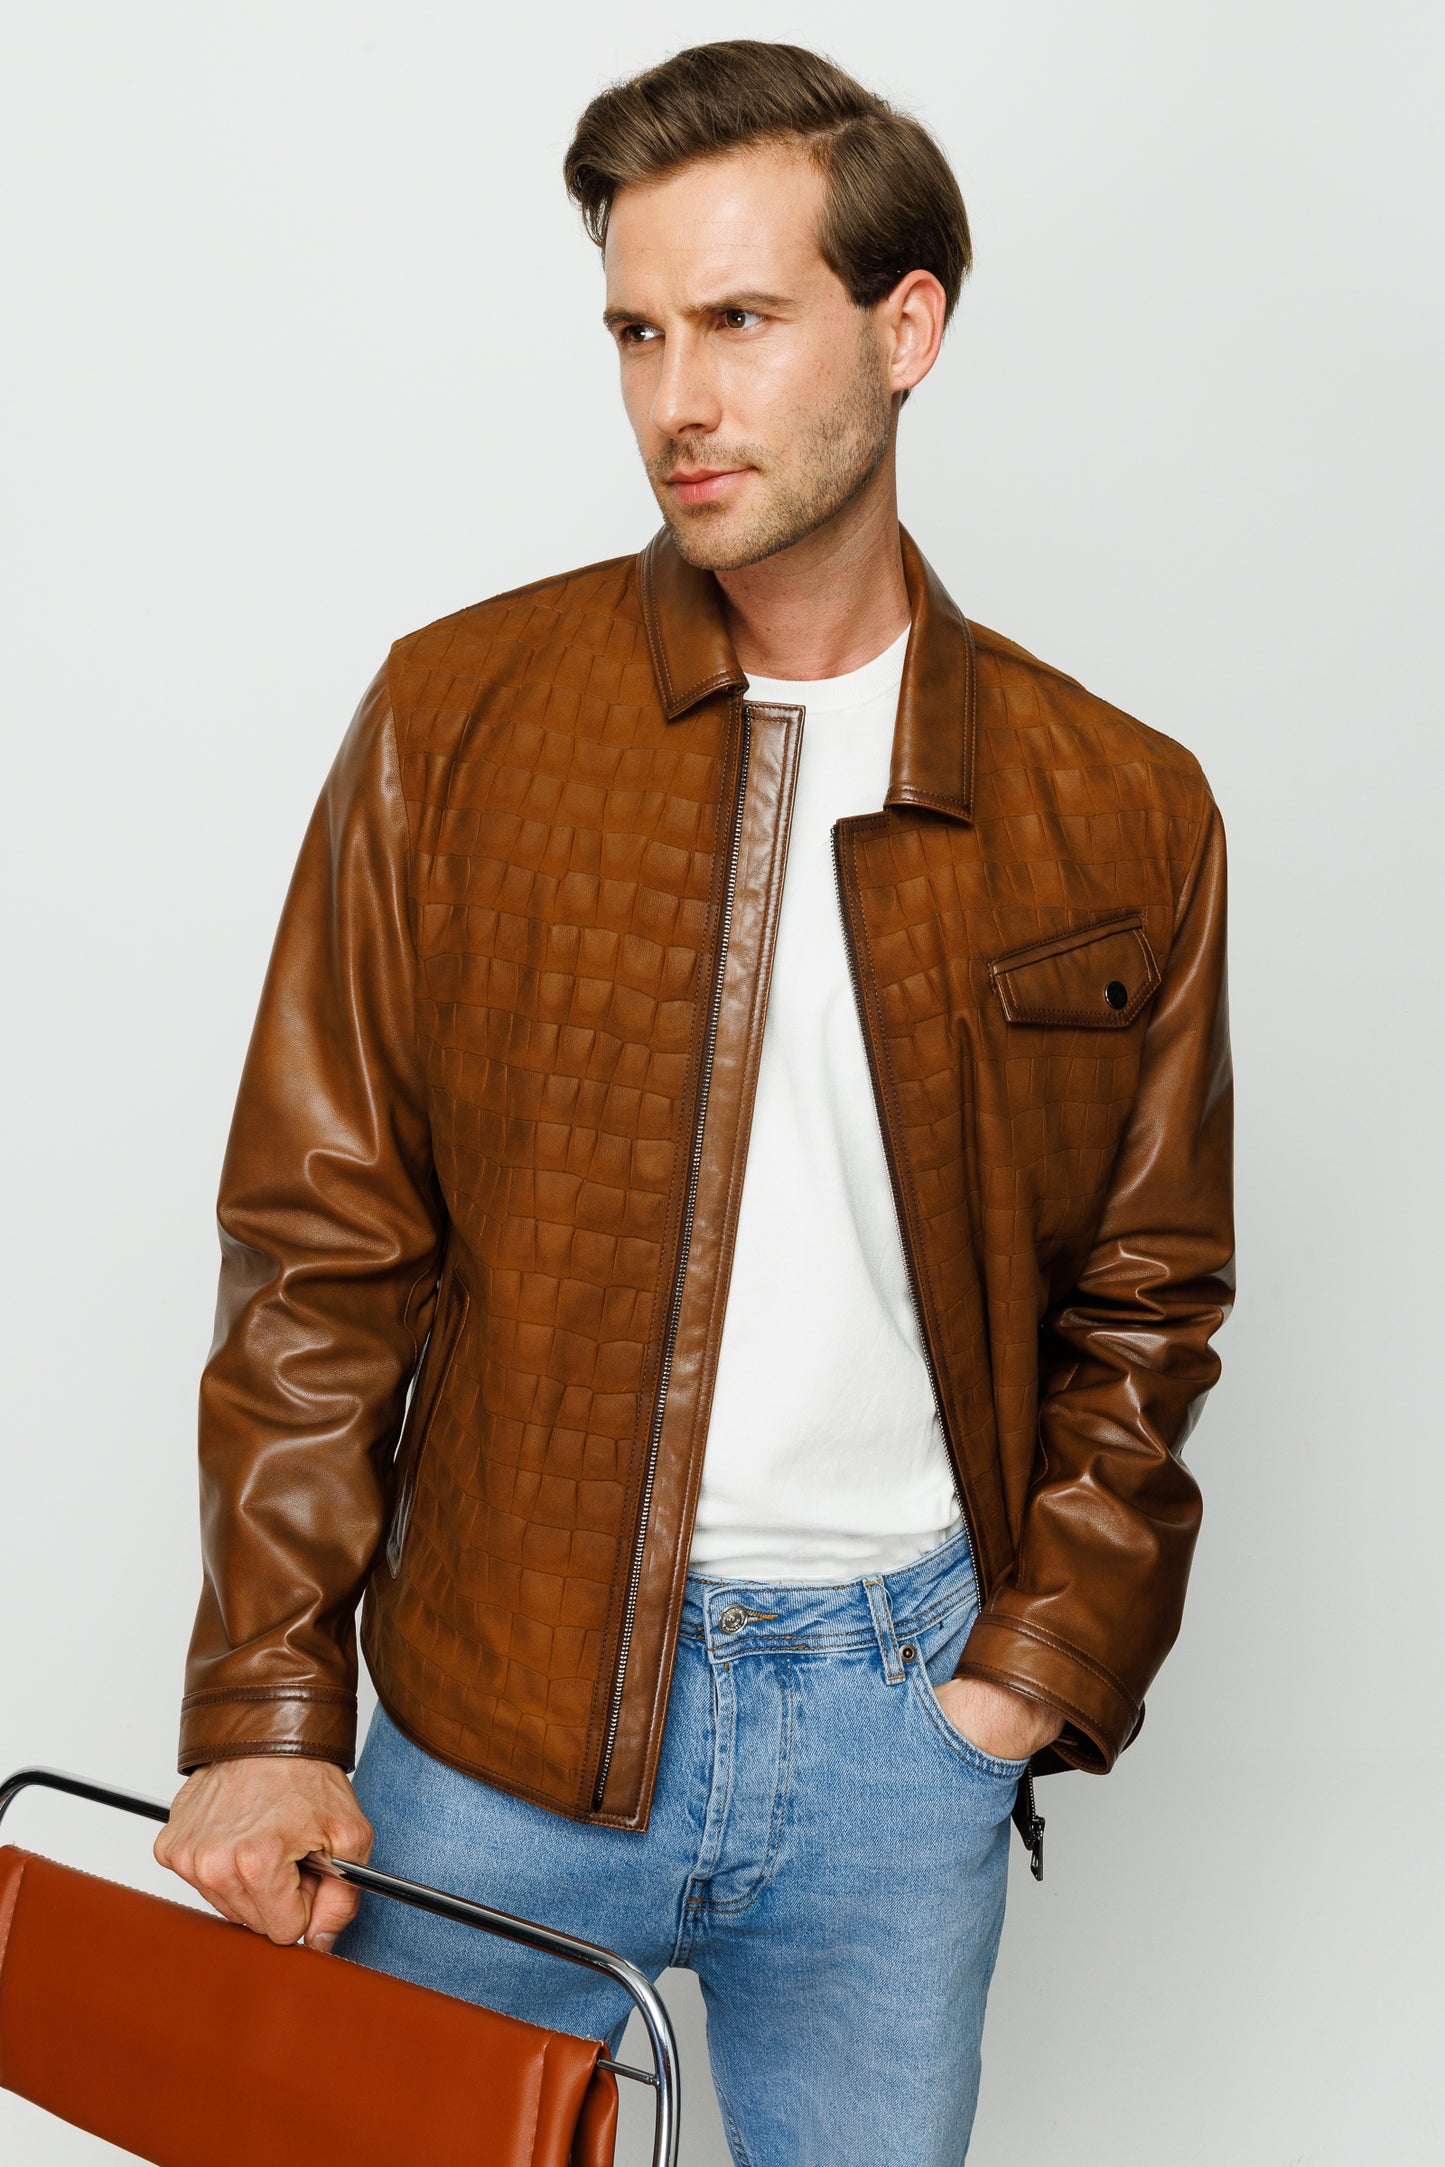 The Emerson Tan Leather Men Jacket